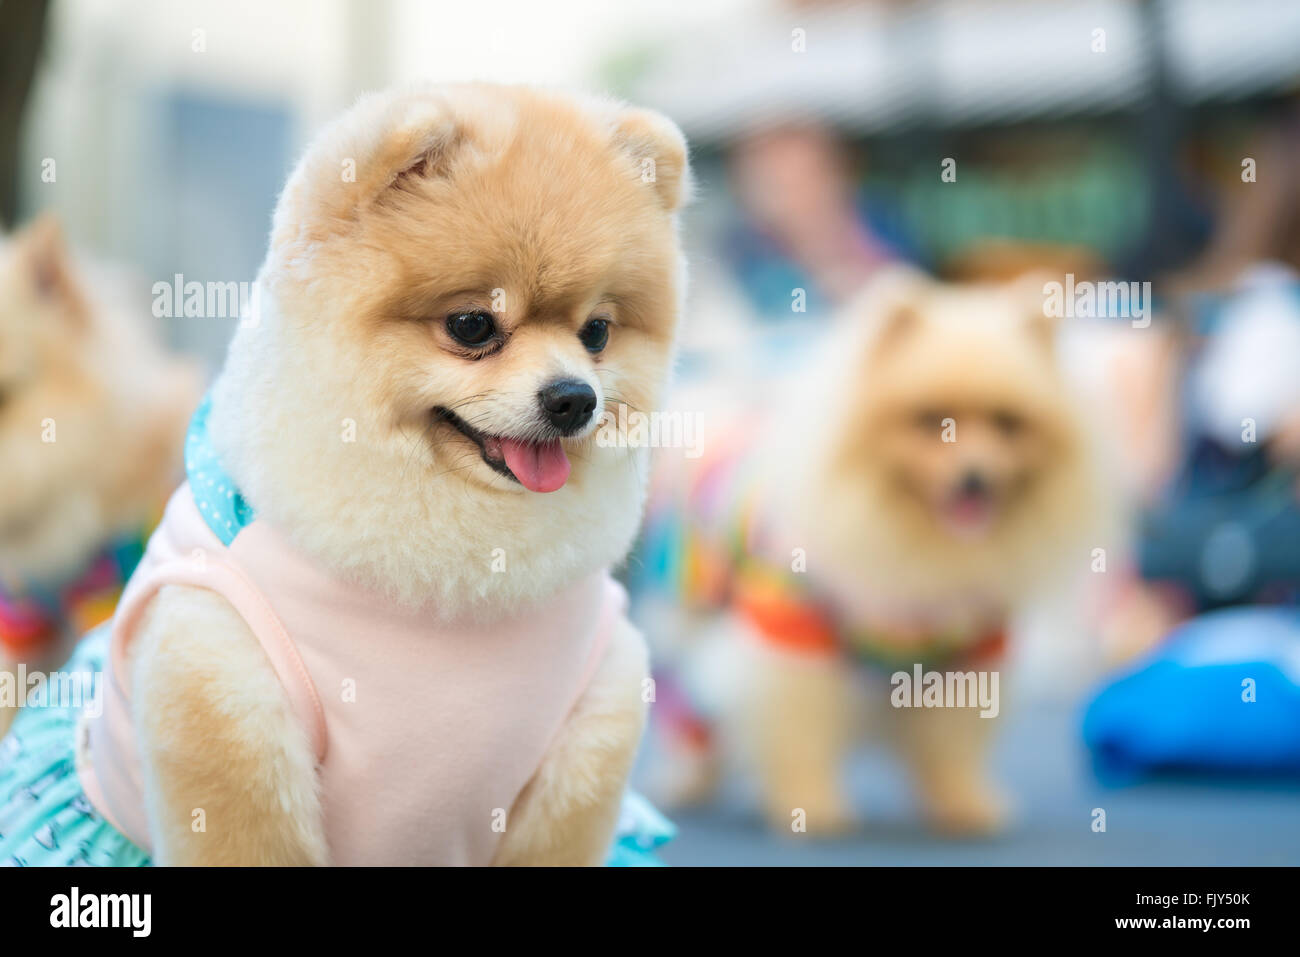 Cute pomeranian dog in fashionable clothes Stock Photo